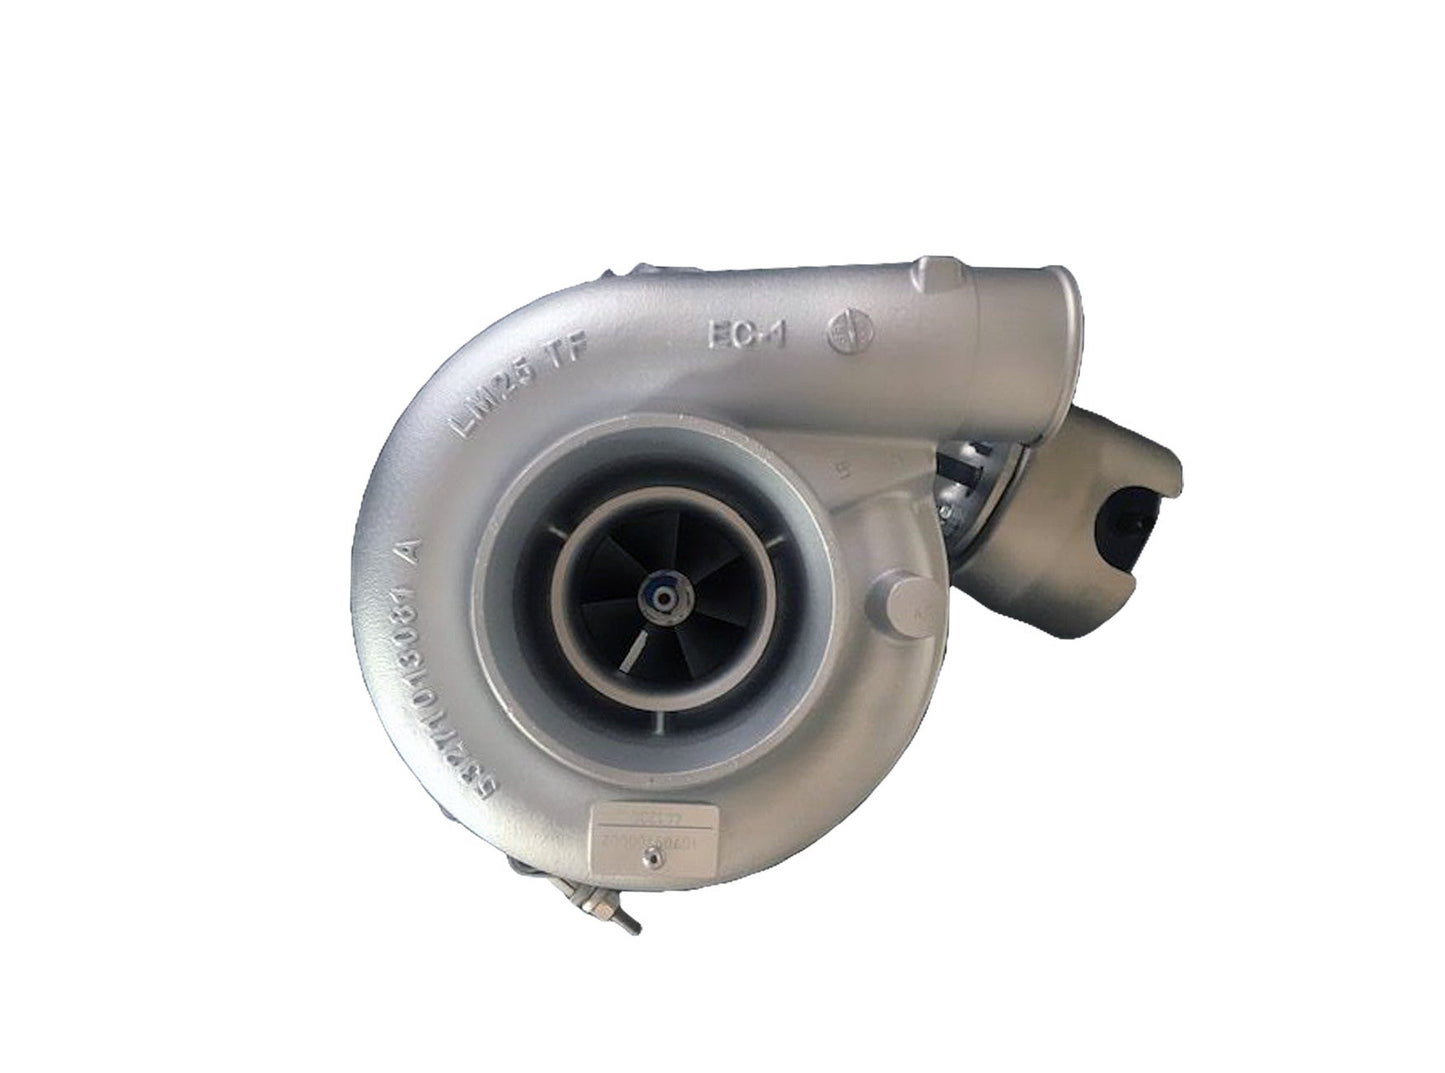 Bomag exhaust gas turbocharger '05716238